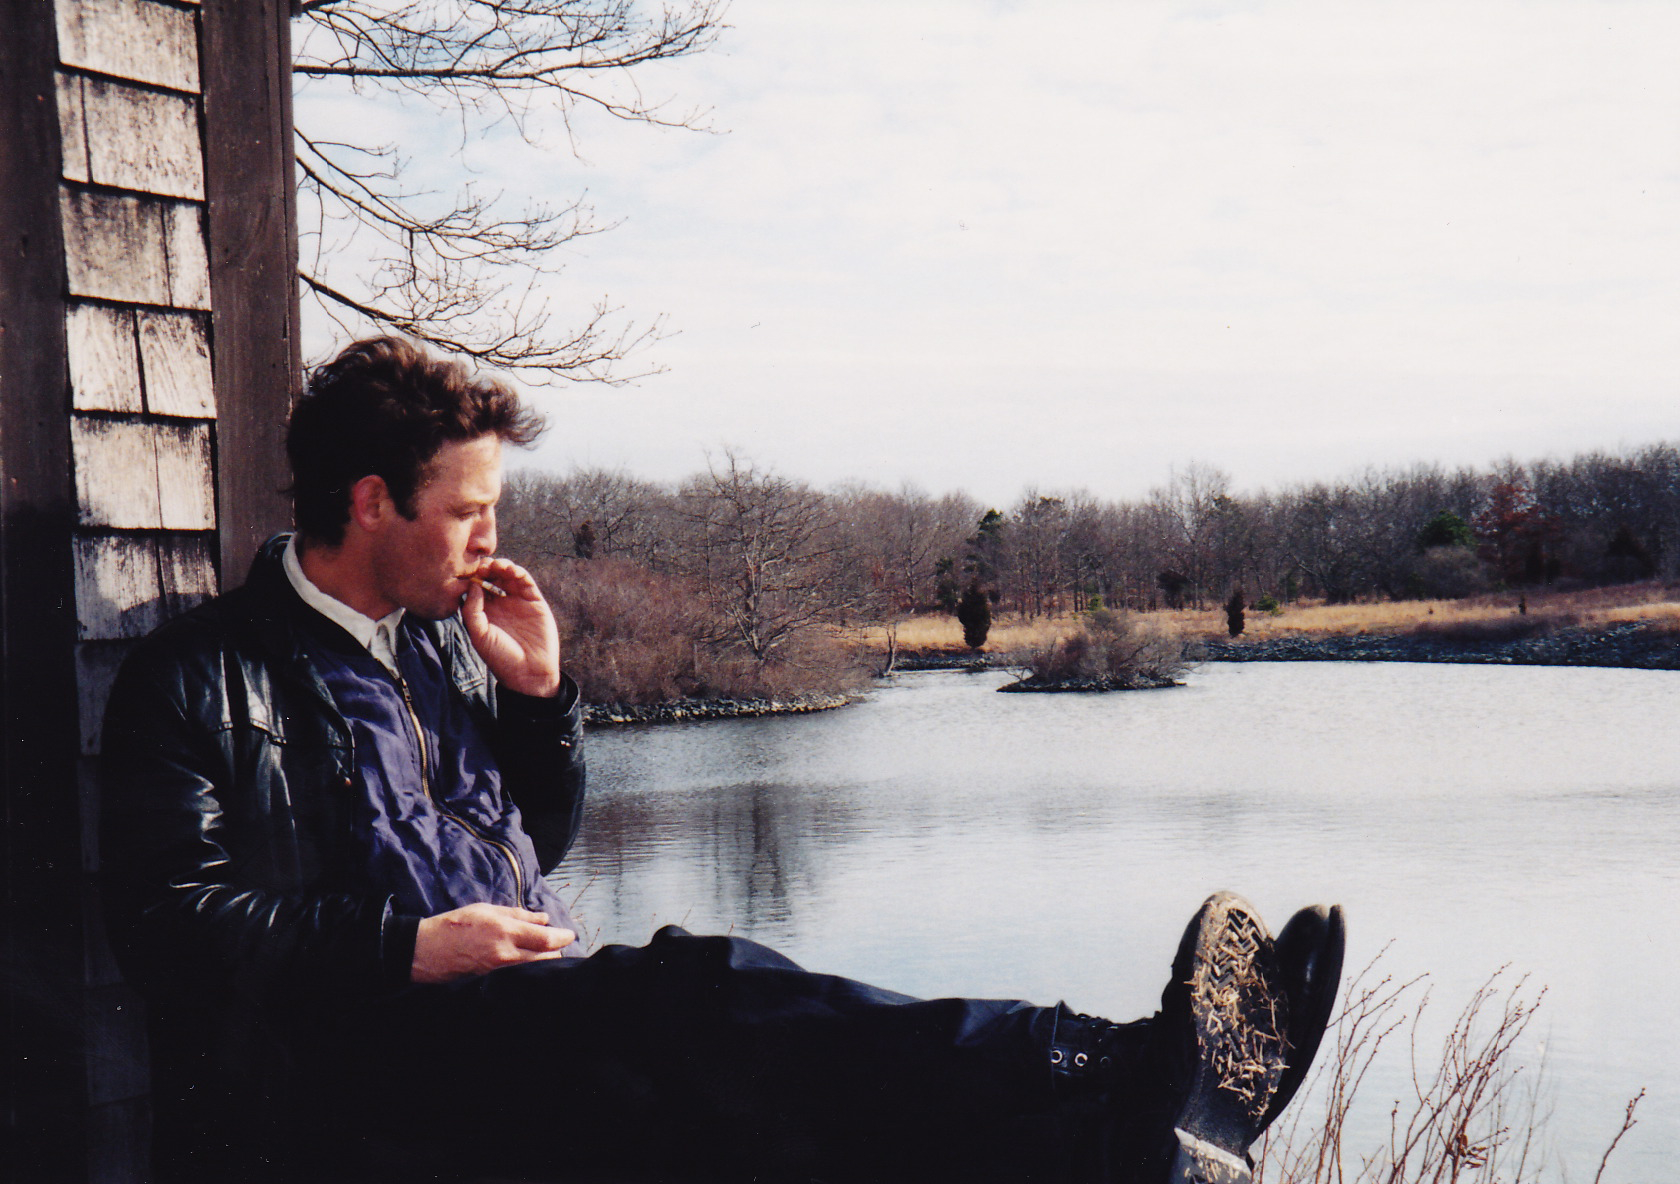 CURE FOR PAIN: THE MARK SANDMAN STORY